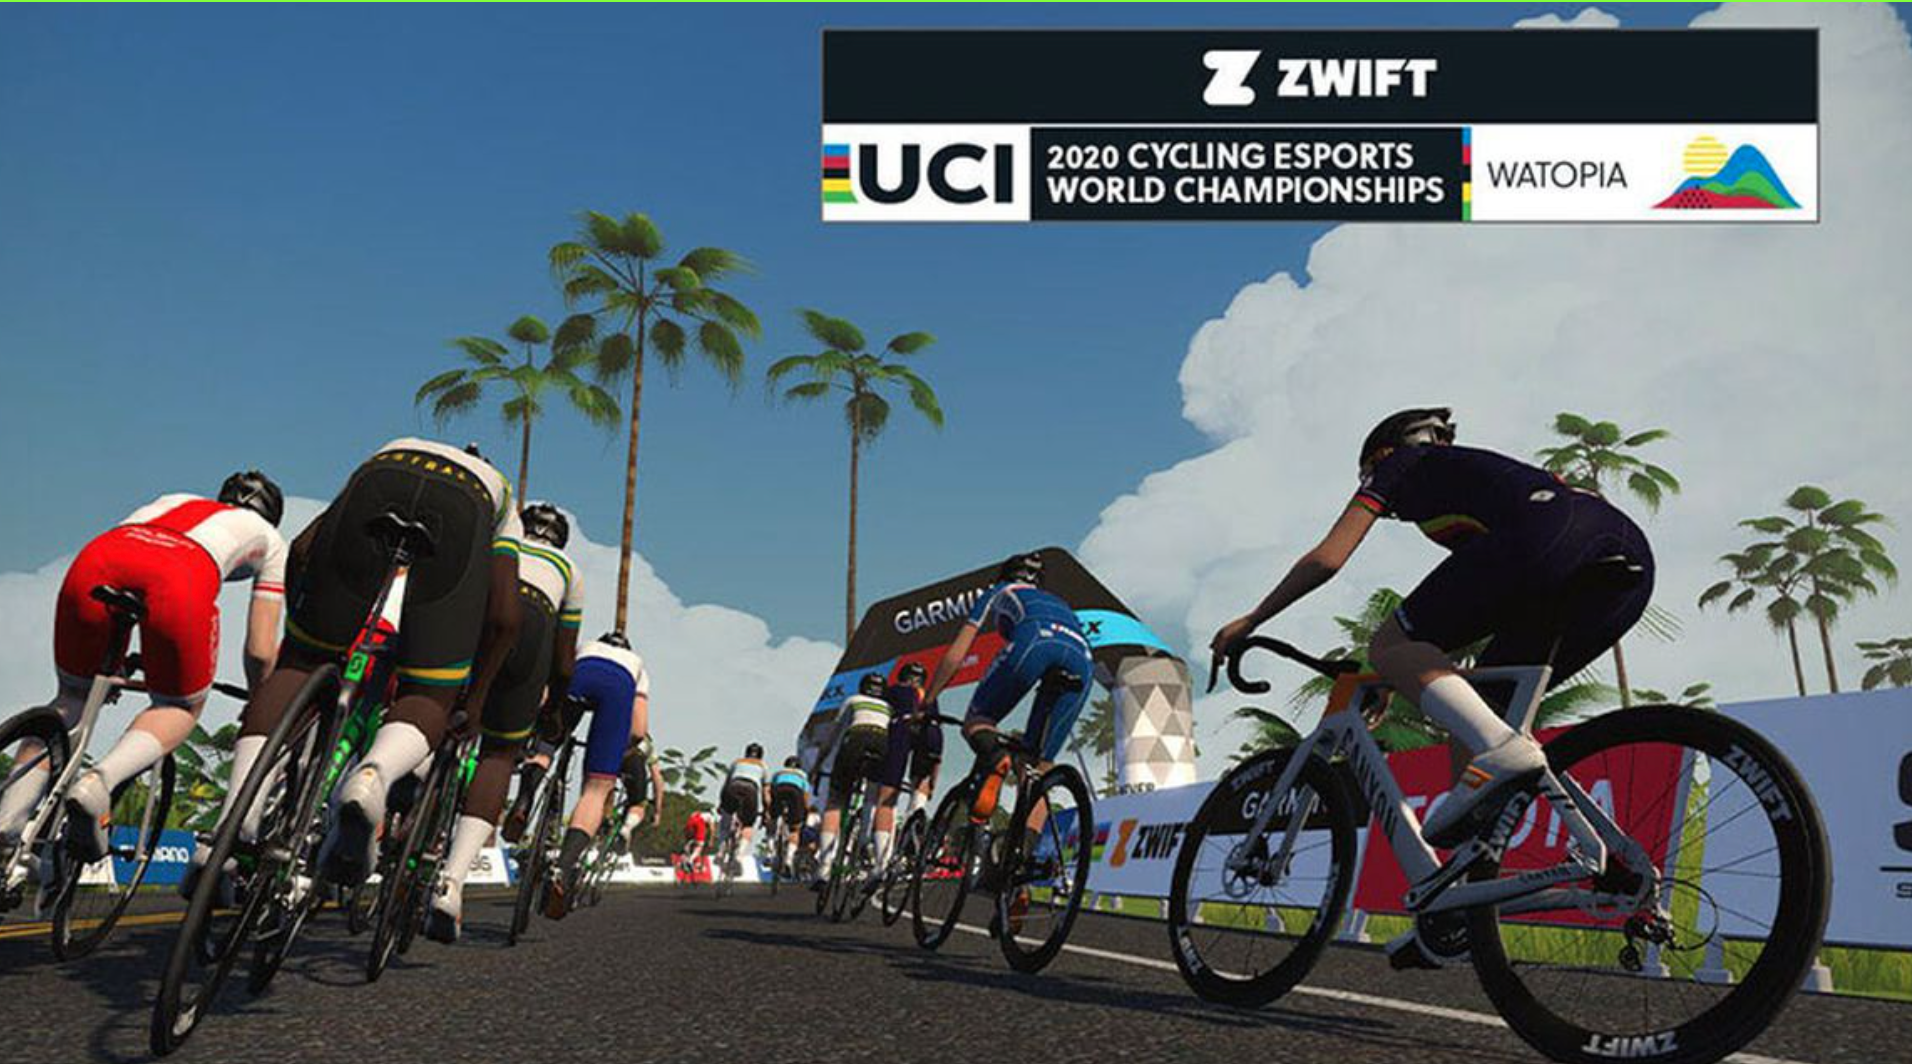 Now live Lionel Sanders competes in the UCI Cycling Esports World Championships on Zwift